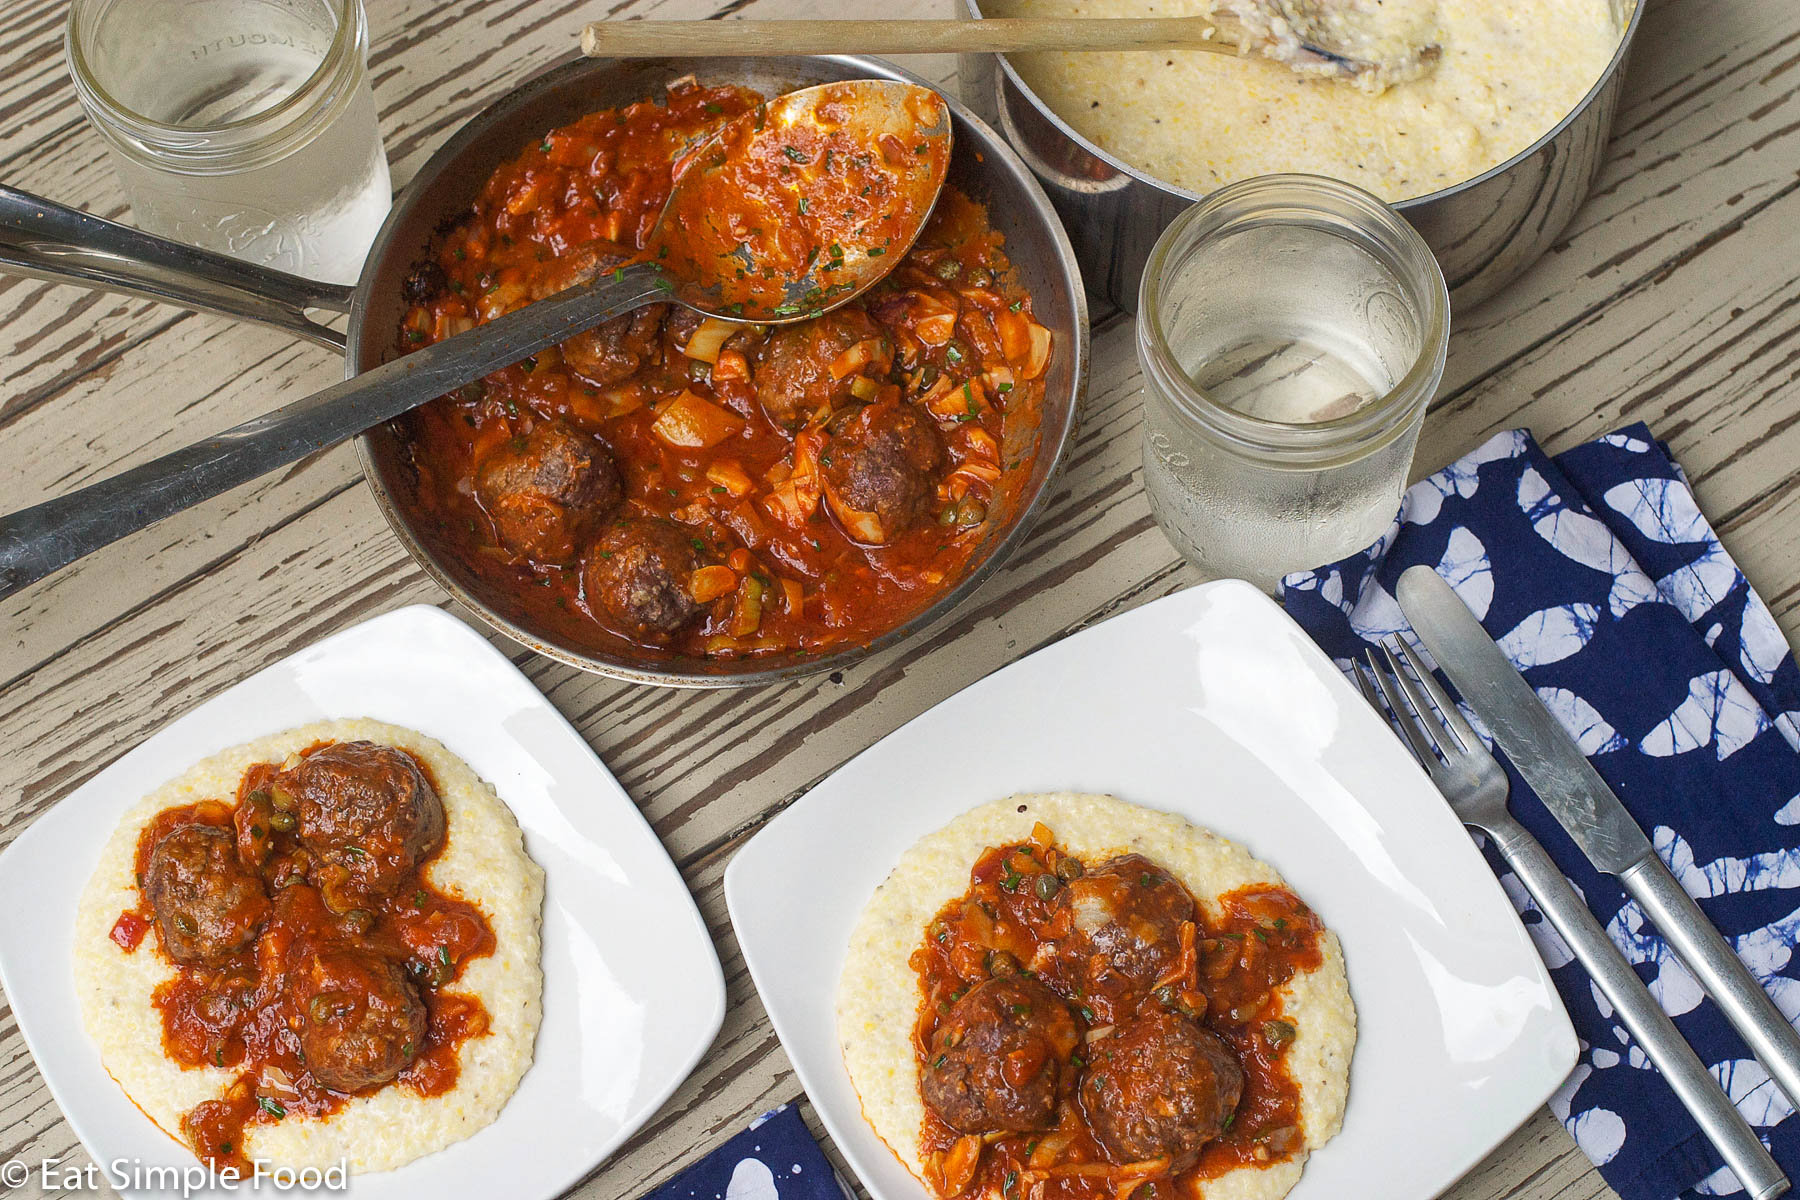 2 square plates with grits and meatballs in a red sauce. Glass of water and a shallow pan filled with meatballs and red sauce.